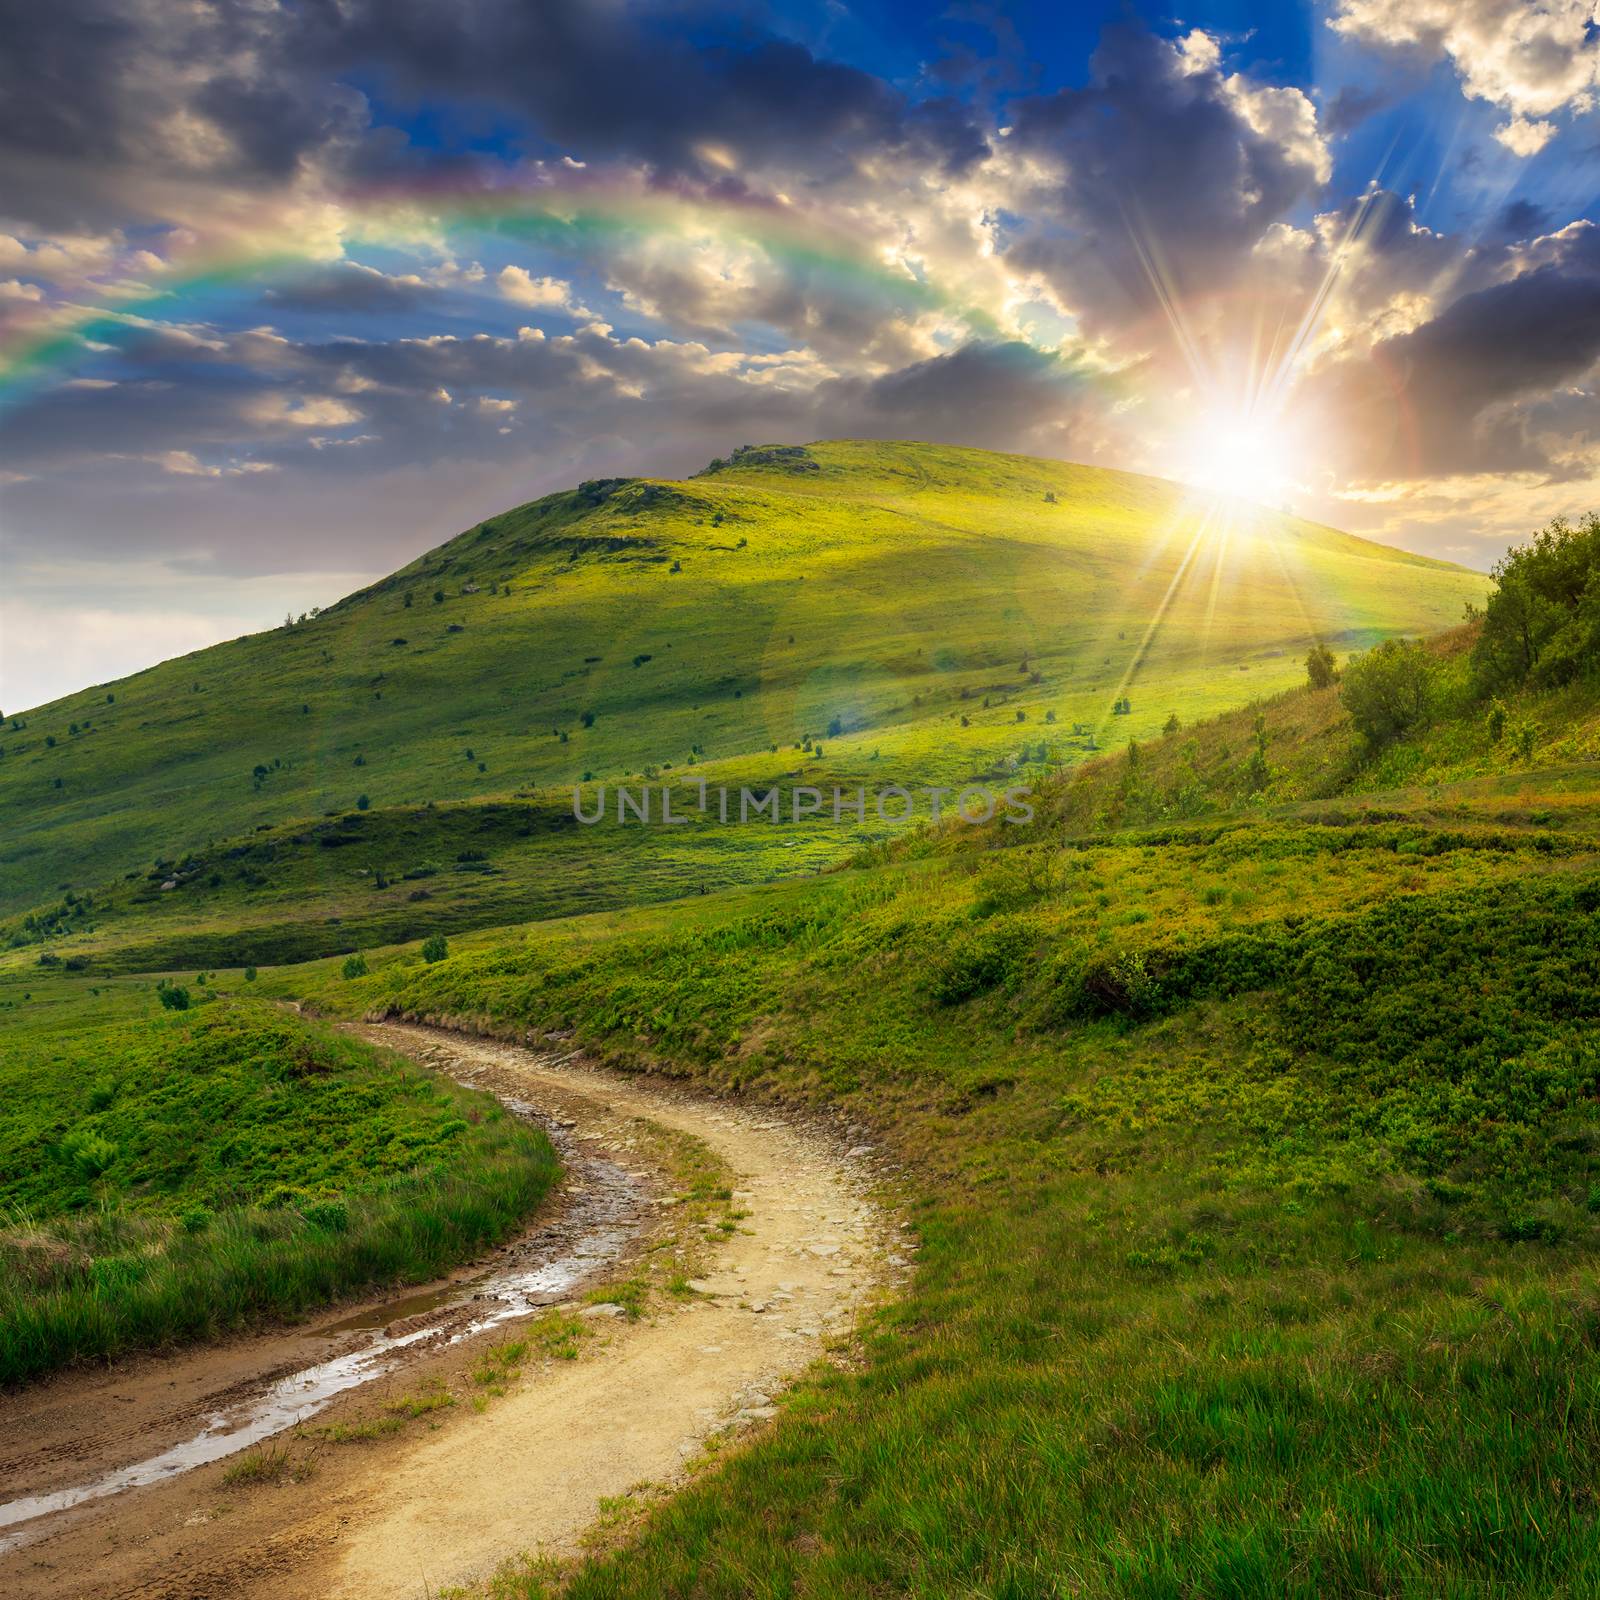 mountain path uphill to the sky at sunset with rainbow by Pellinni